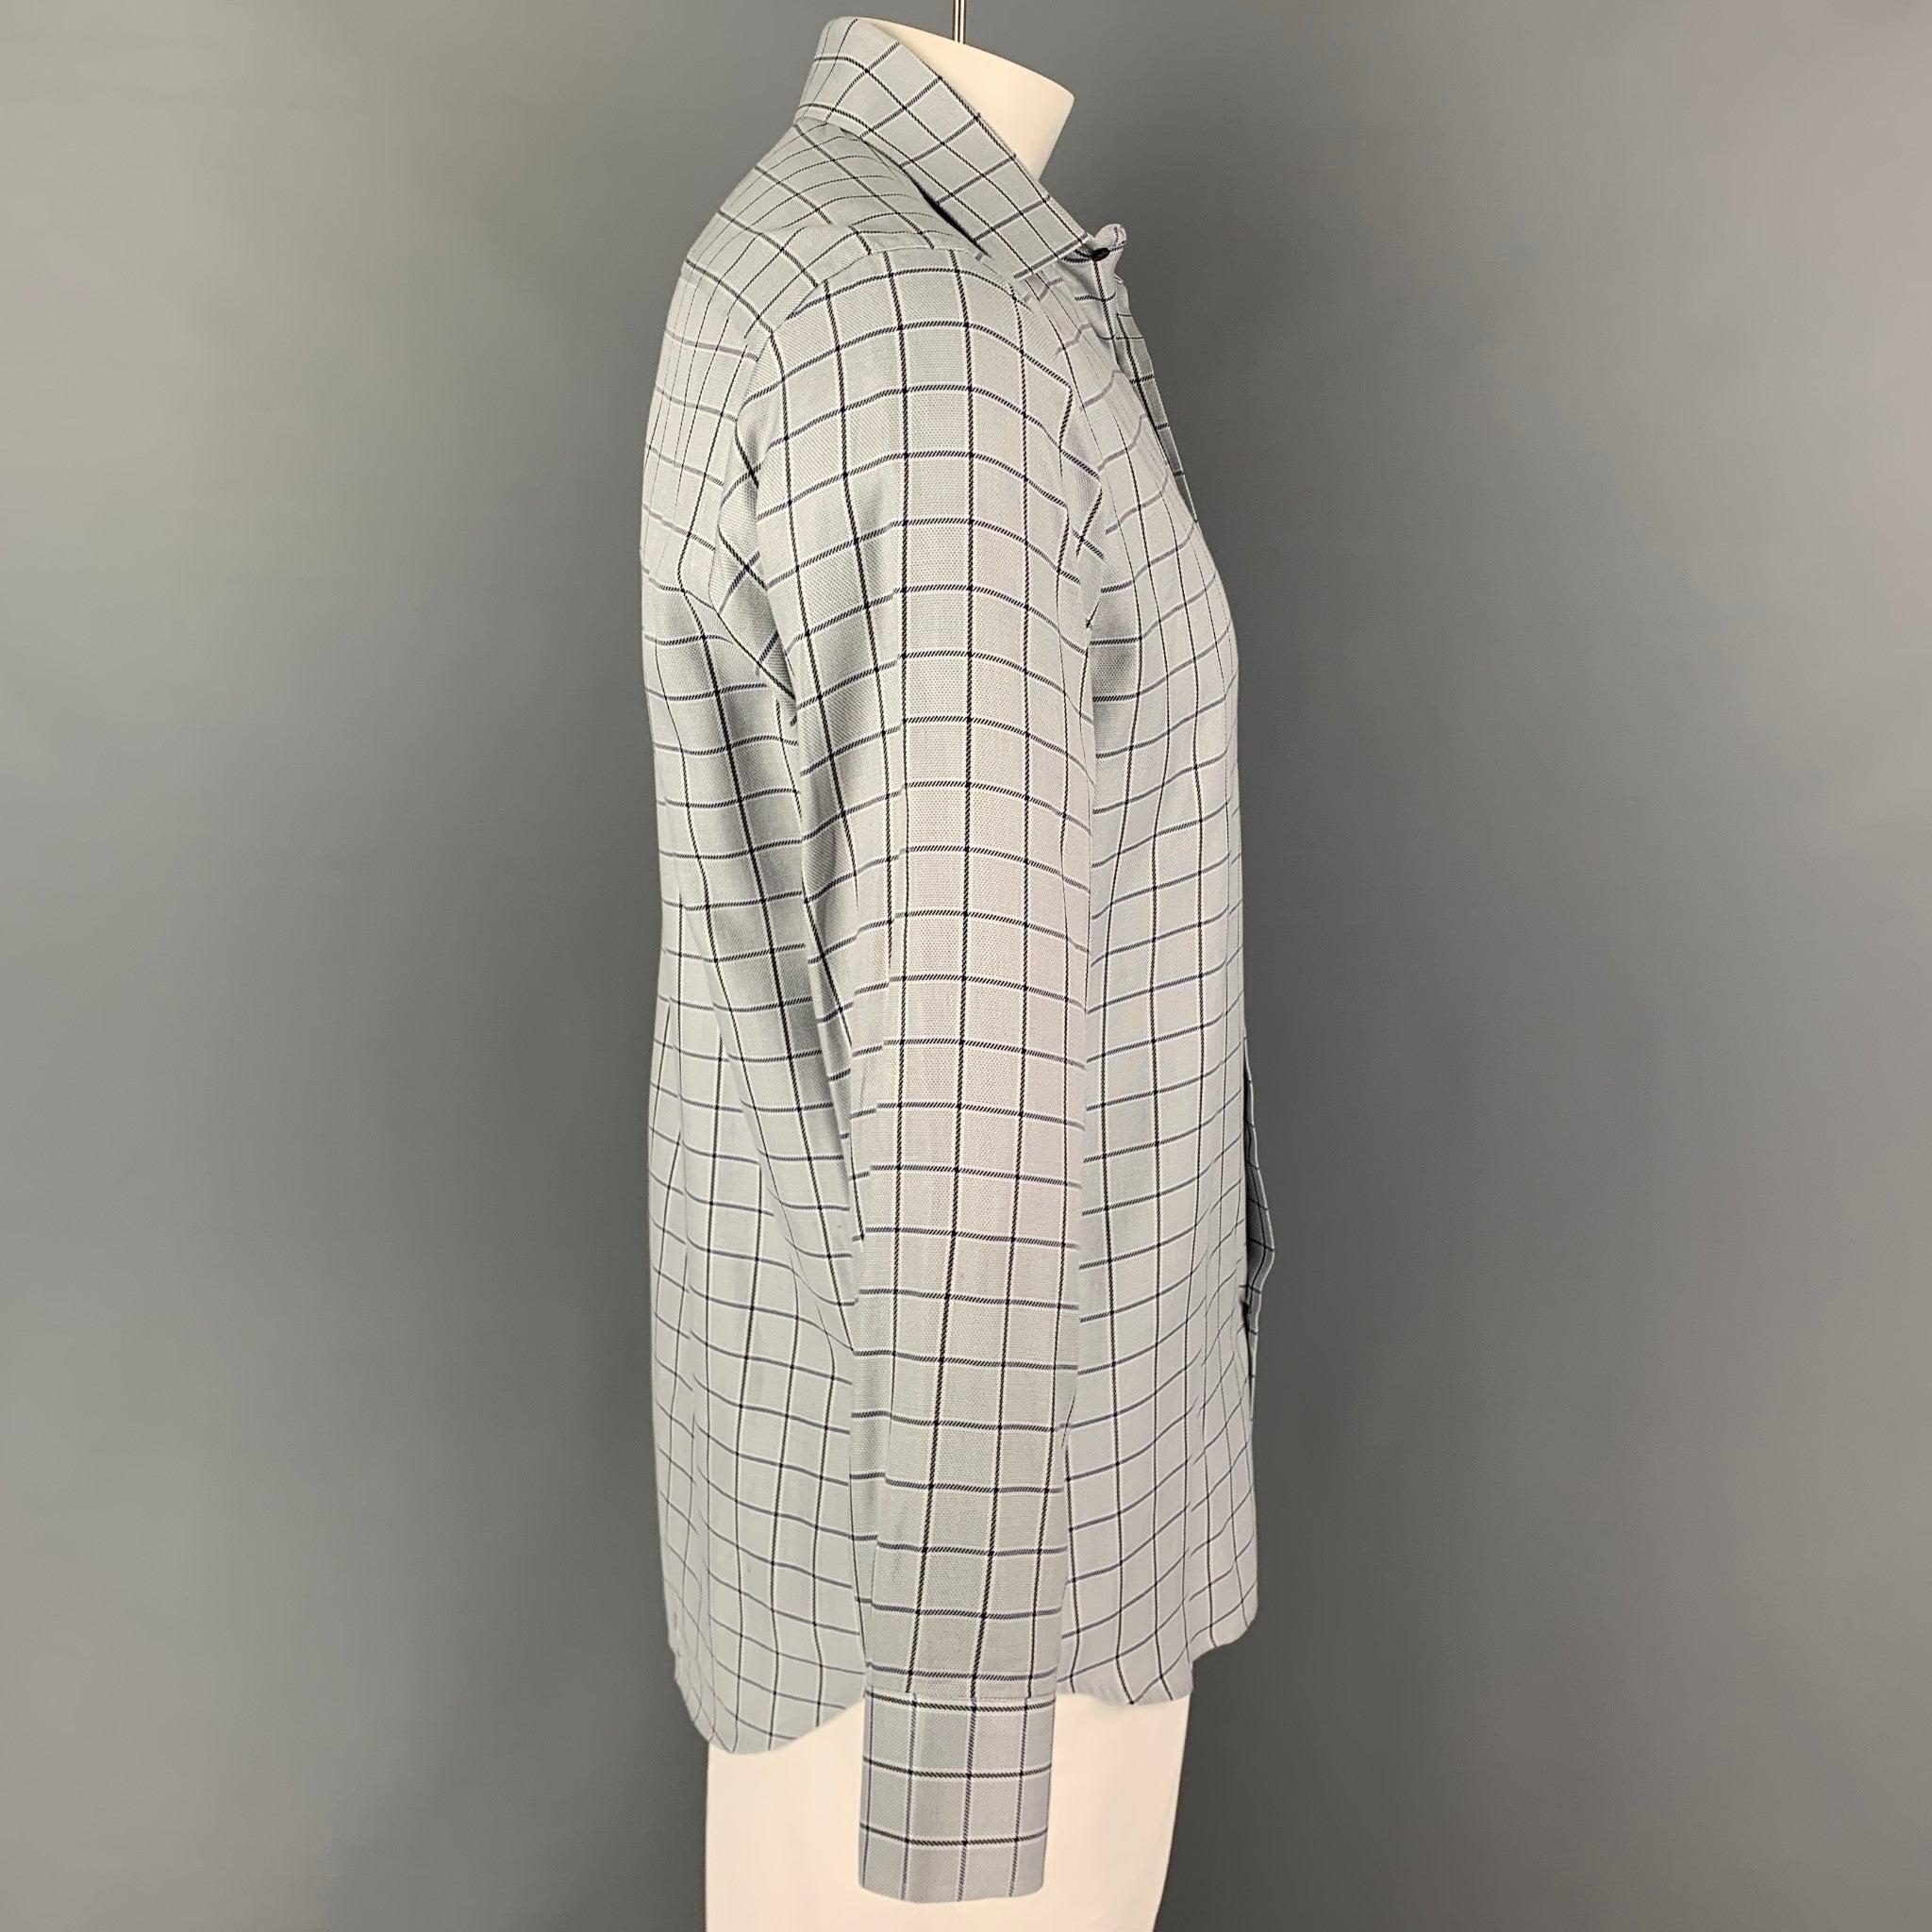 SAKS FIFTH AVENUE long sleeve shirt comes in a blue plaid cotton featuring a spread collar and a button up closure.
Very Good
Pre-Owned Condition. 

Marked:   16R 

Measurements: 
 
Shoulder: 18.5 inches Chest: 44 inches Sleeve: 25 inches Length: 32